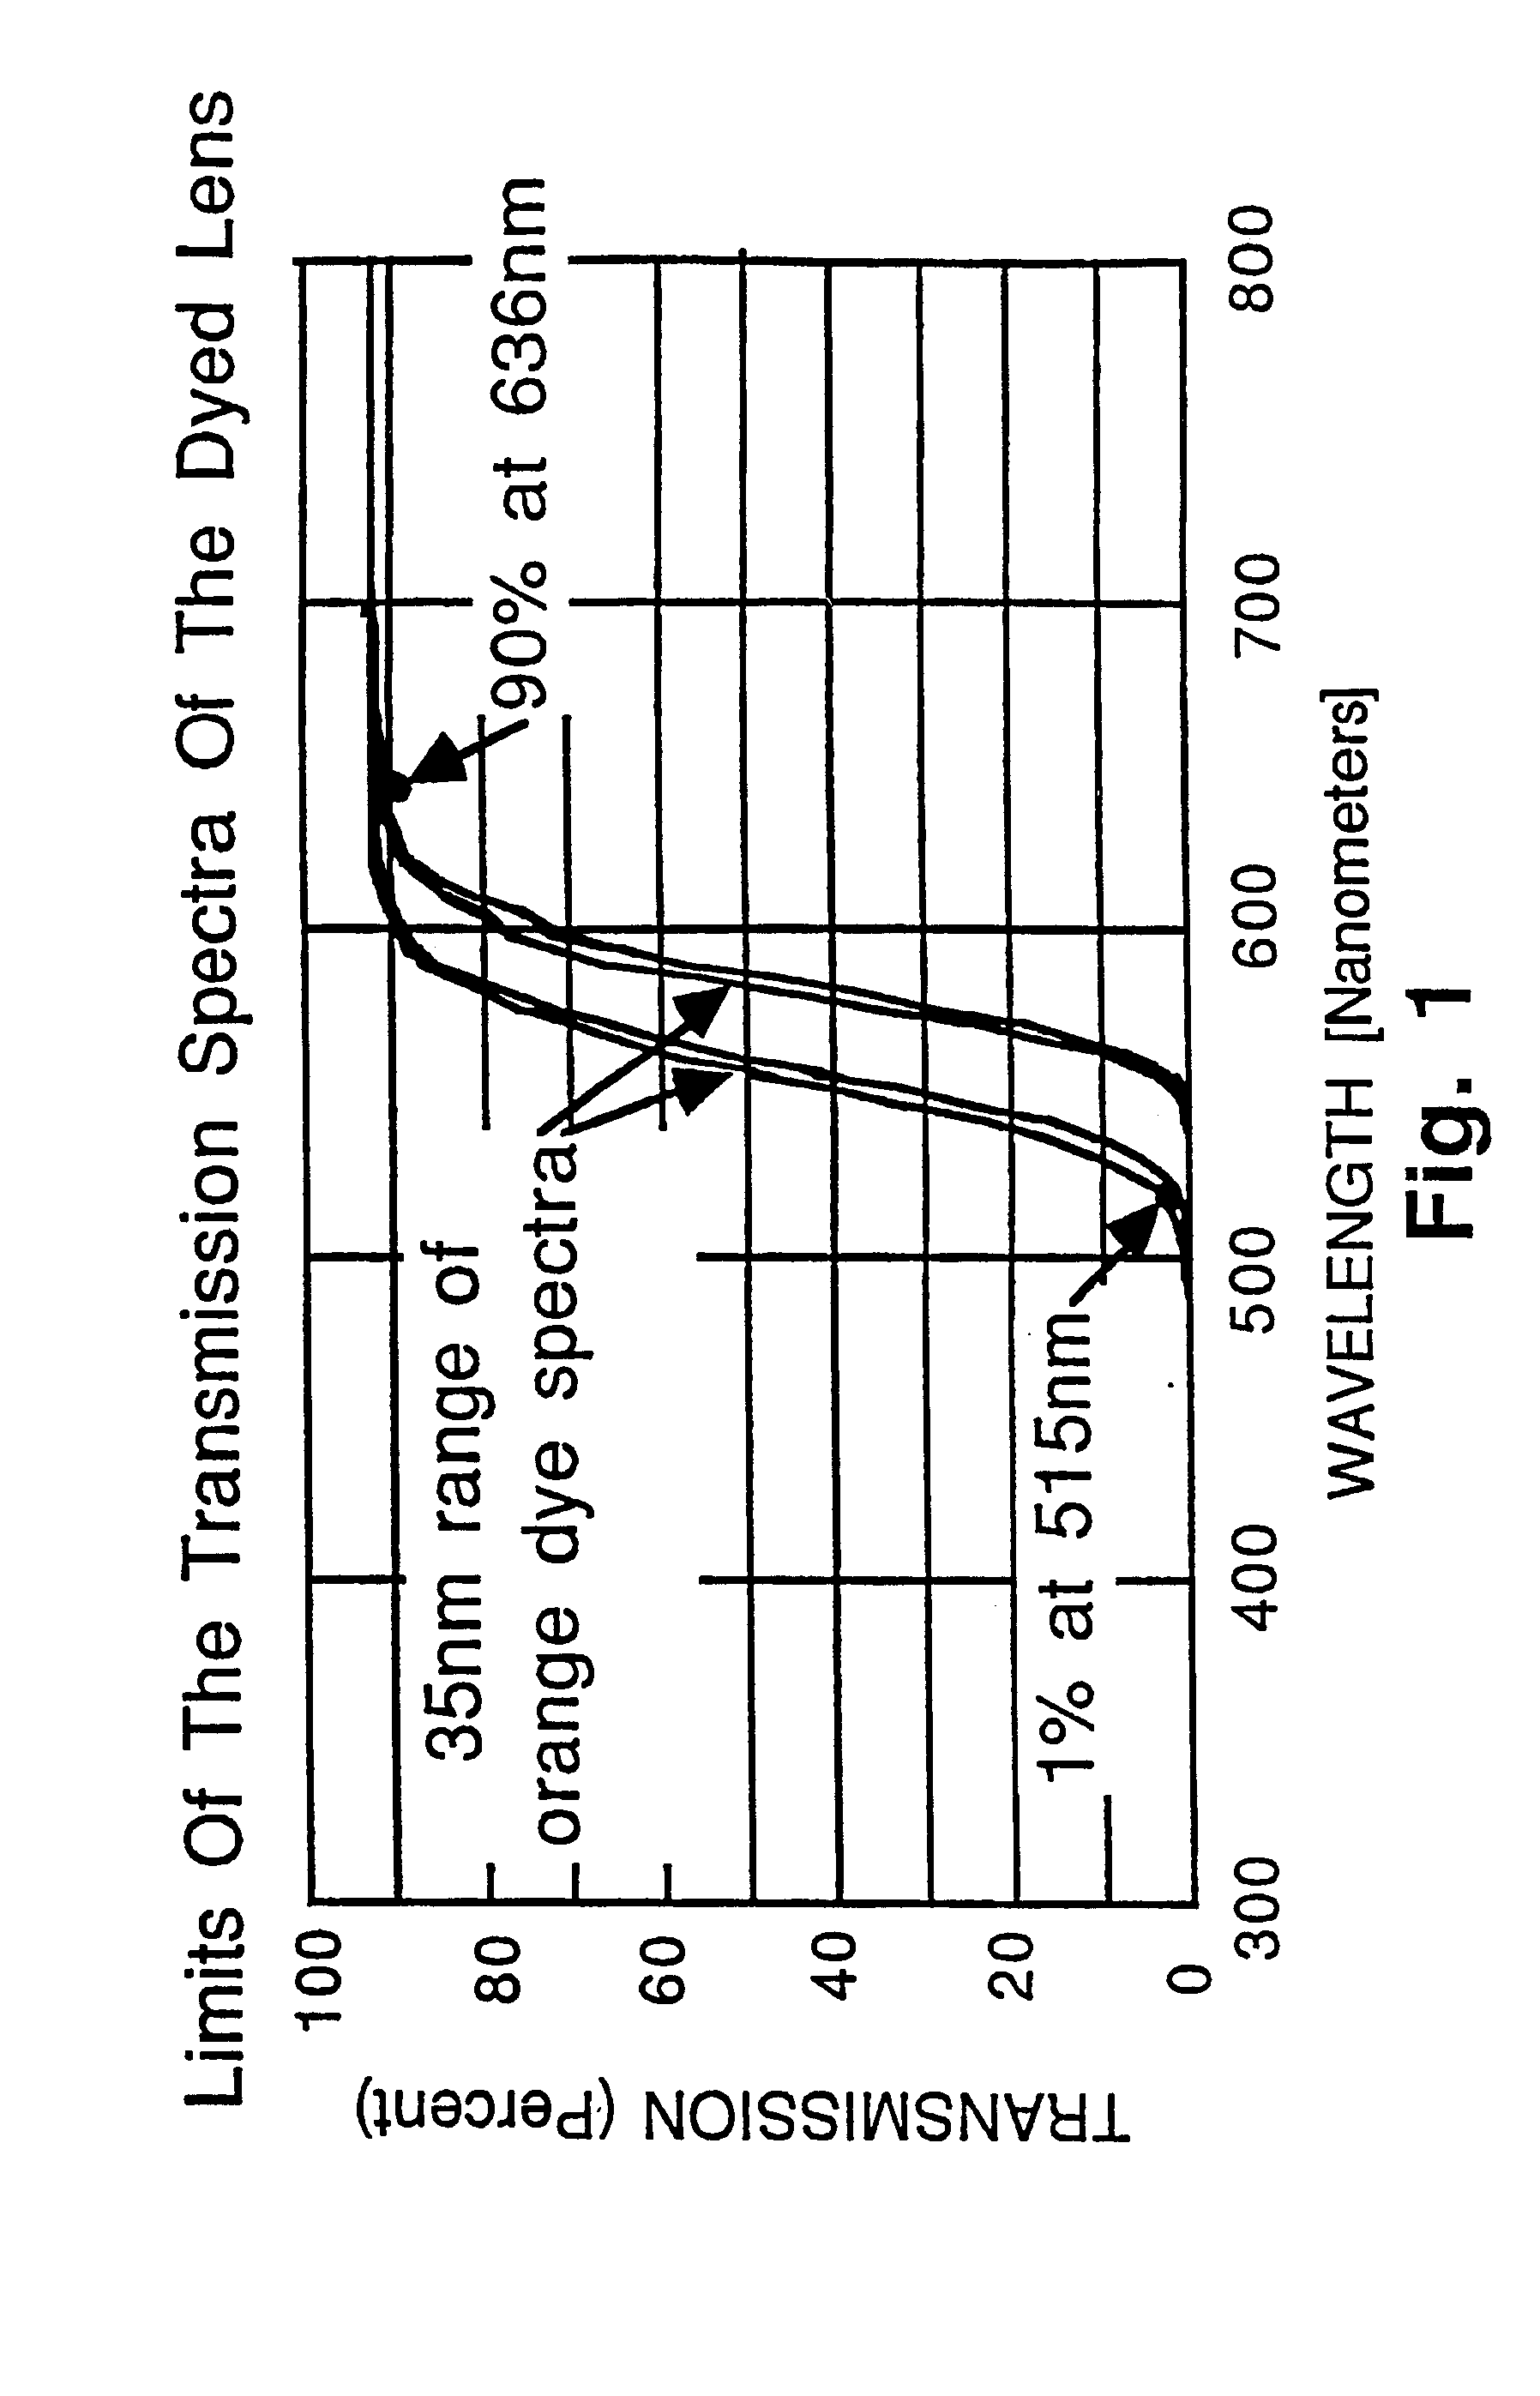 Optical lenses with selective transmissivity functions